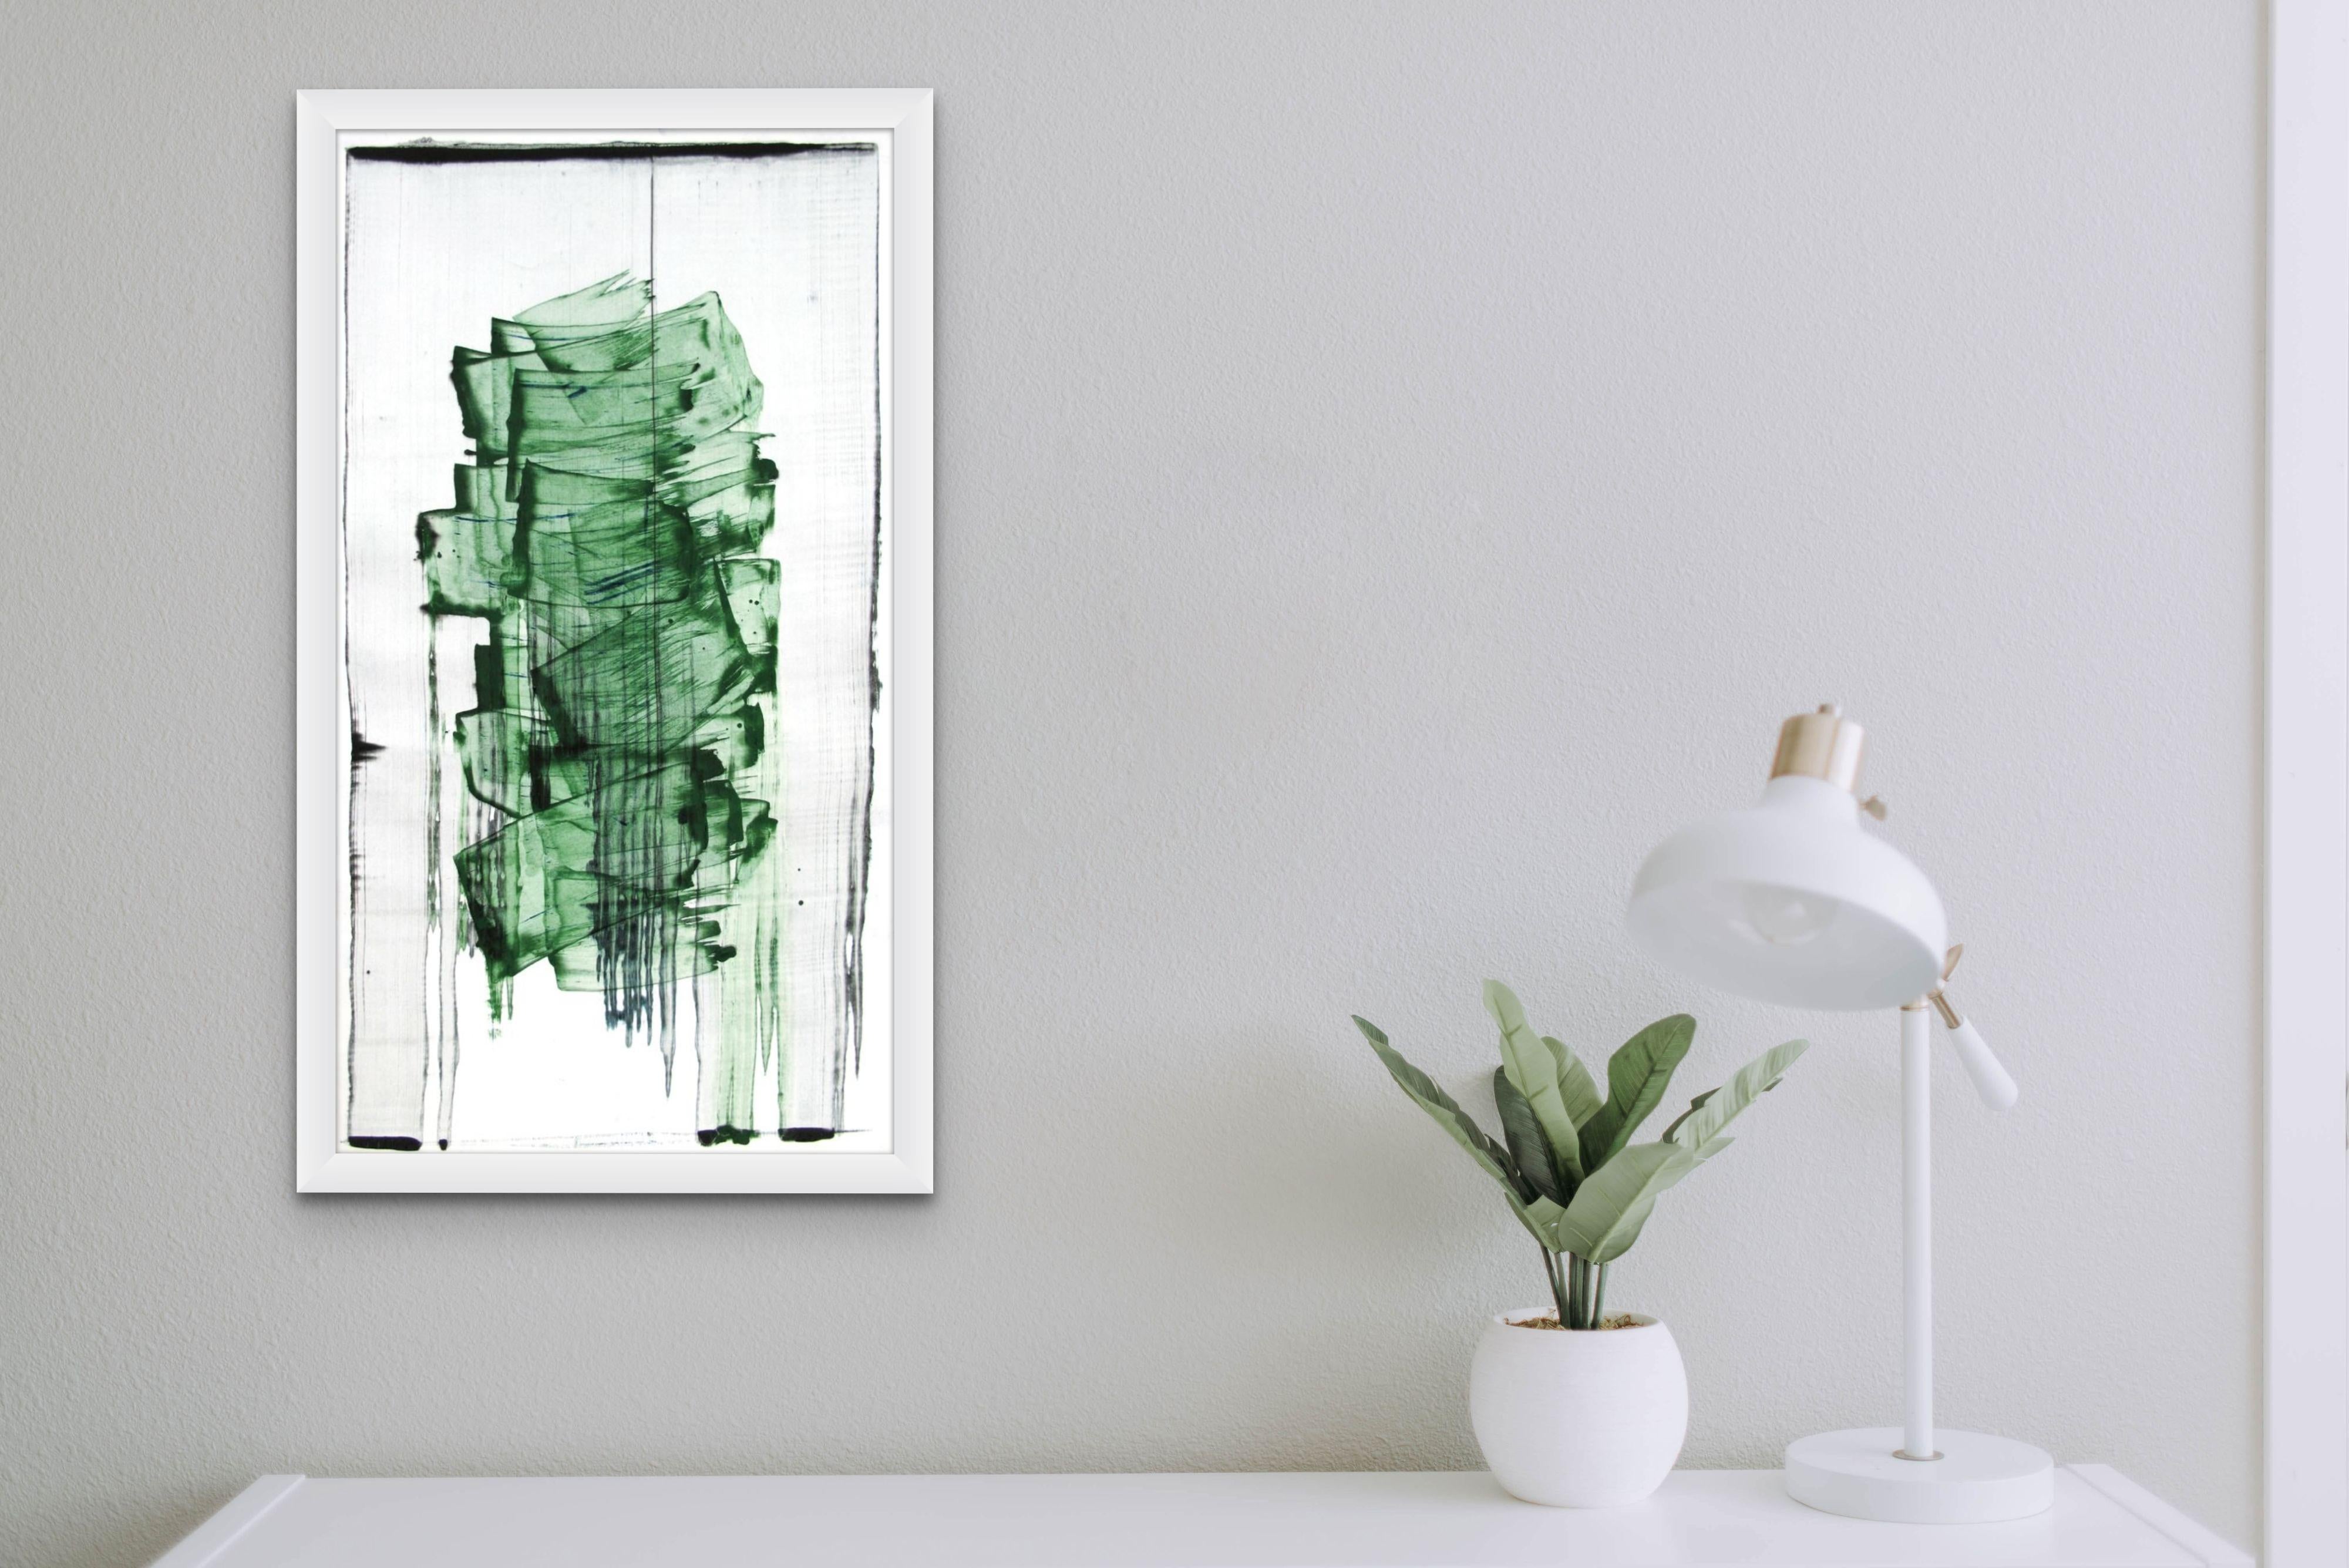 Mad green 9 (Abstract Painting) - Art by Emma Godebska